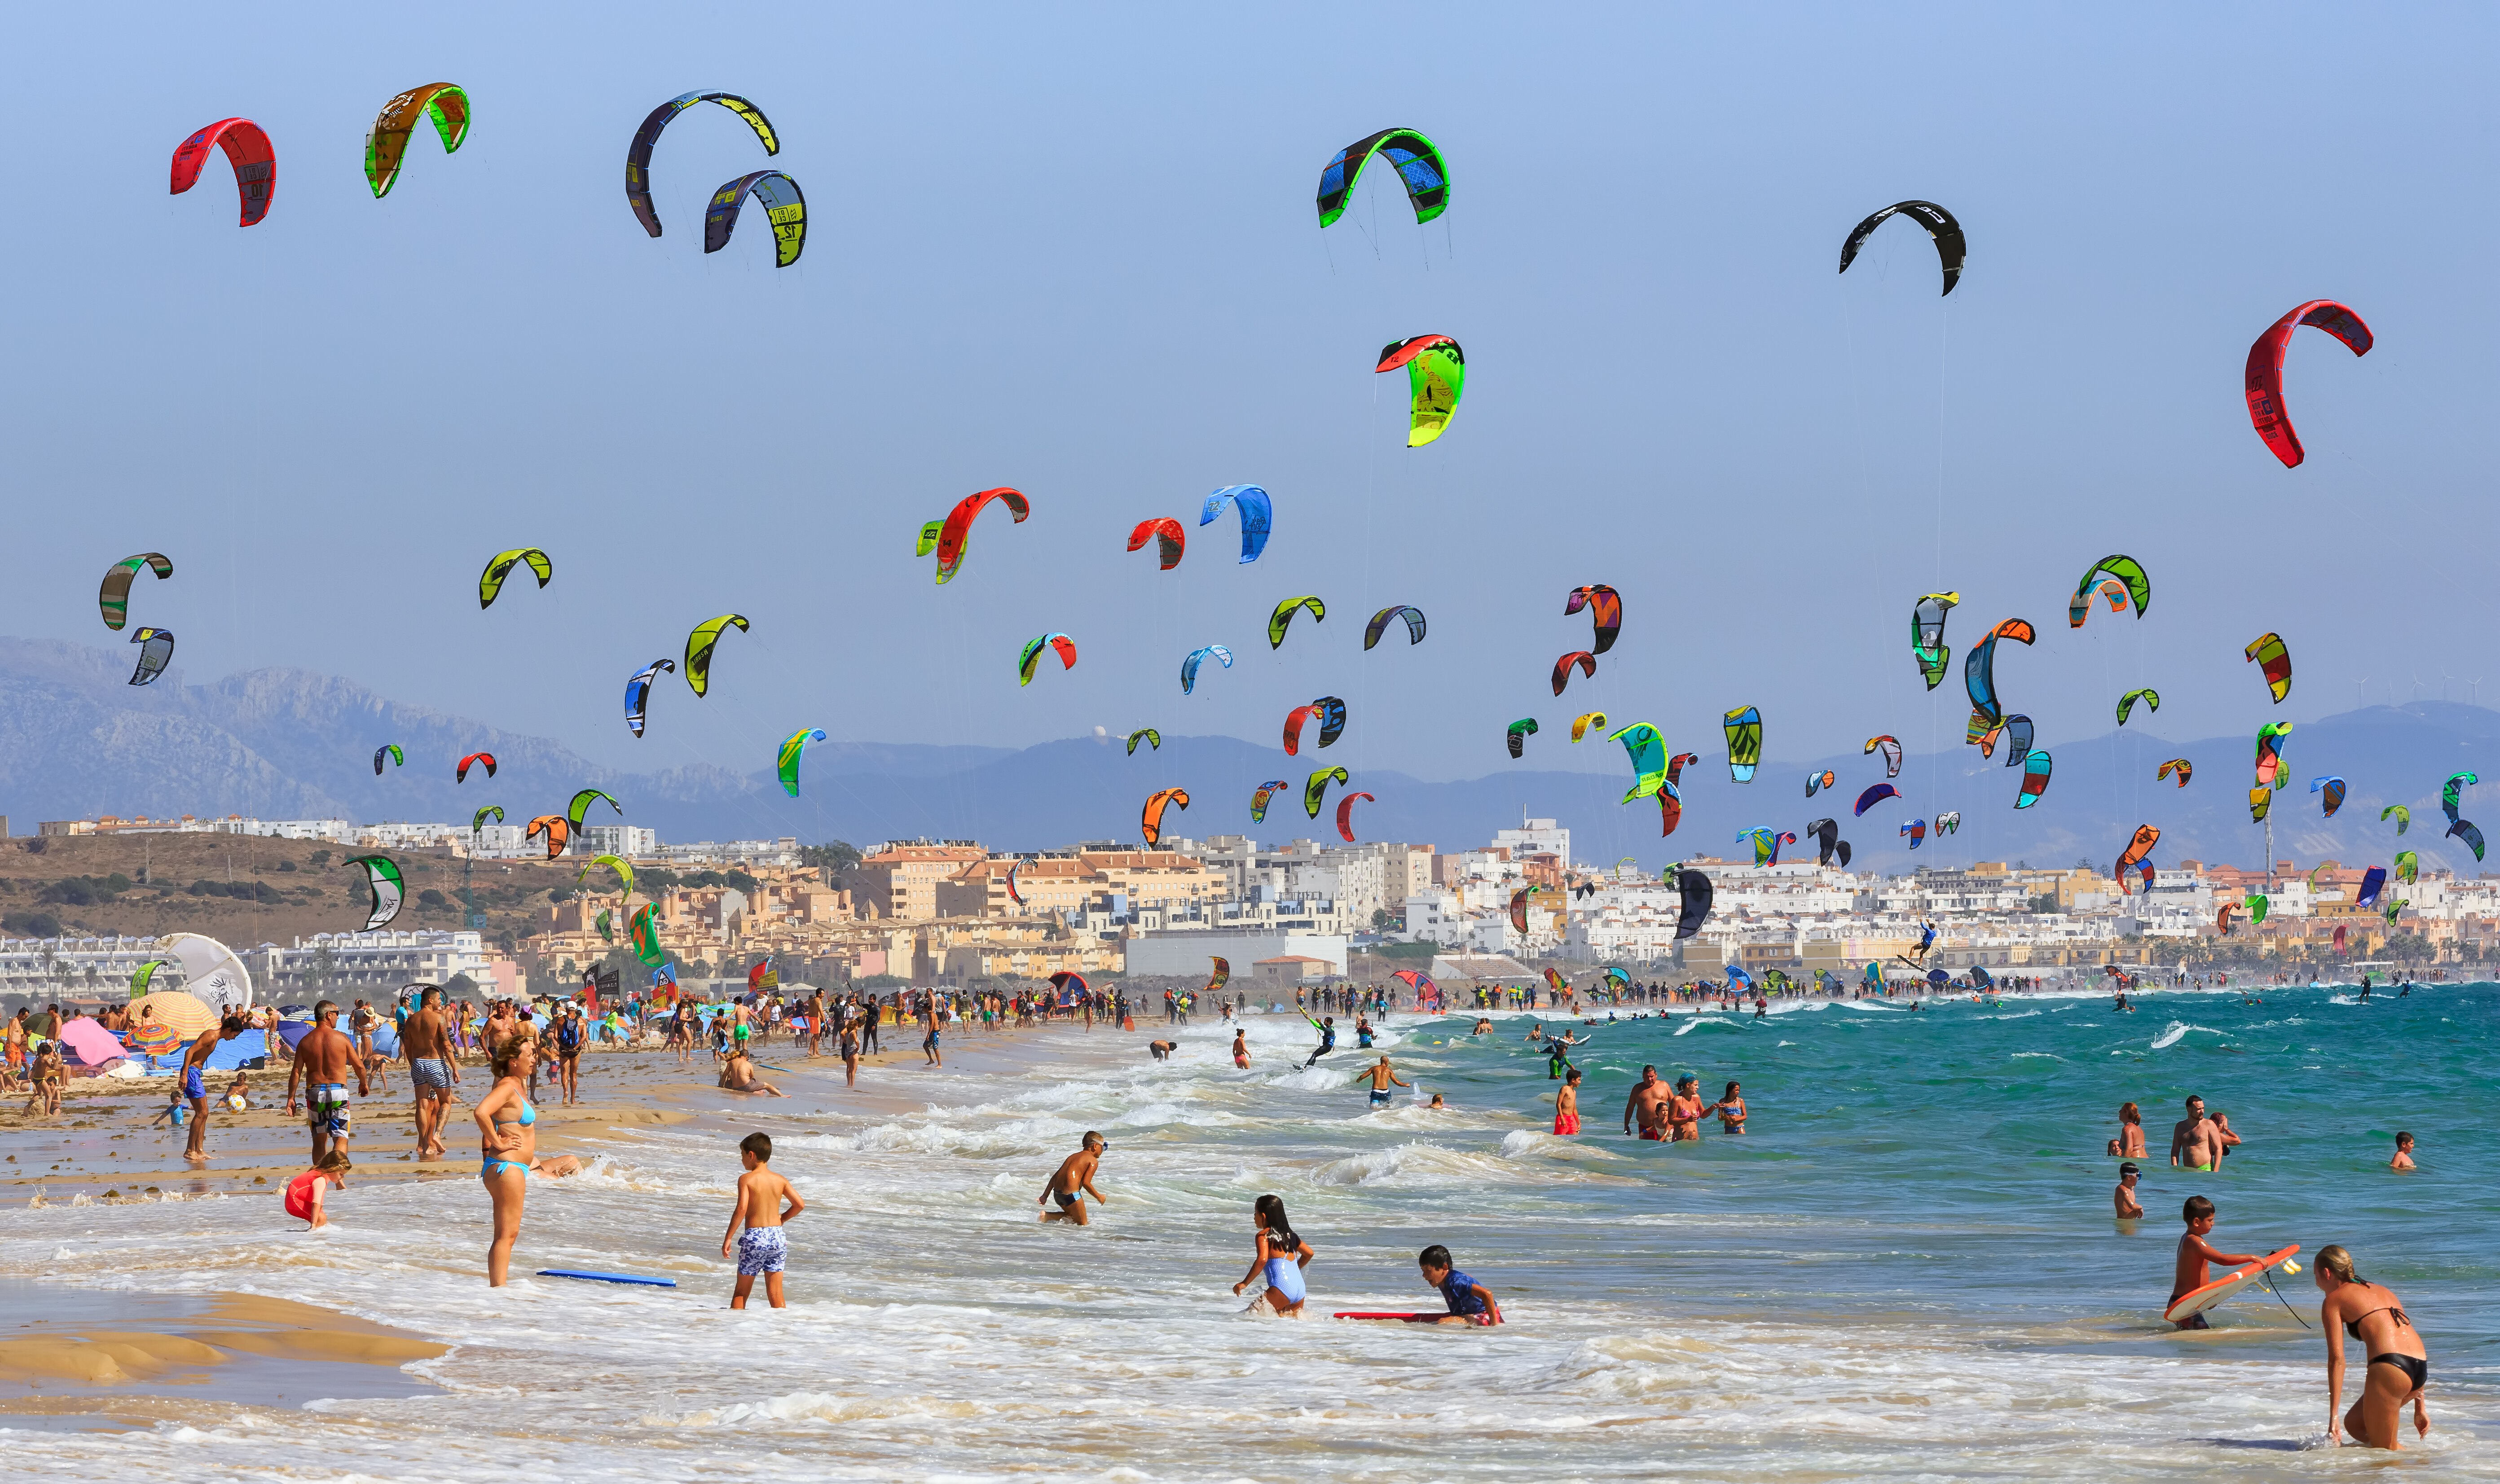 A sky dotted with kites in Tarifa, Spain